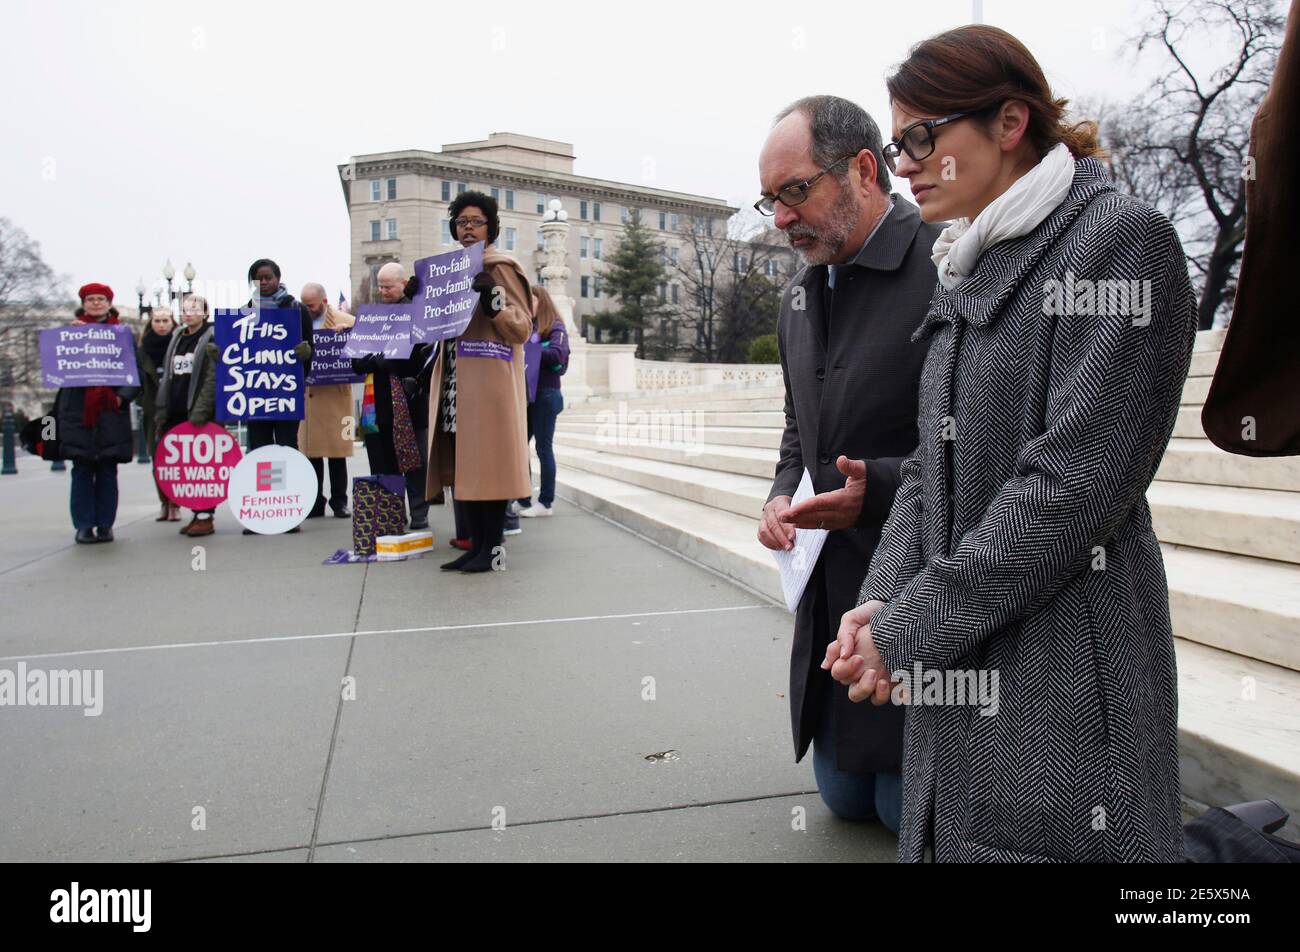 Rev. Patrick Mahoney (2nd R) and Missy Martinez, the National High School Program Coordinator for Students for Life, pray as pro-choice activists (L) rally in front of the U.S. Supreme Court in Washington, January 15, 2014. U.S. Supreme Court justices on Wednesday raised questions about the scope of a Massachusetts law that ensures access for patients at clinics that perform abortions. A majority of the justices at times expressed concerns during the one-hour argument before the high court that the blanket 35-feet (11-meter) no-entry zone around clinics is overly broad.  REUTERS/Yuri Gripas (U Stock Photo